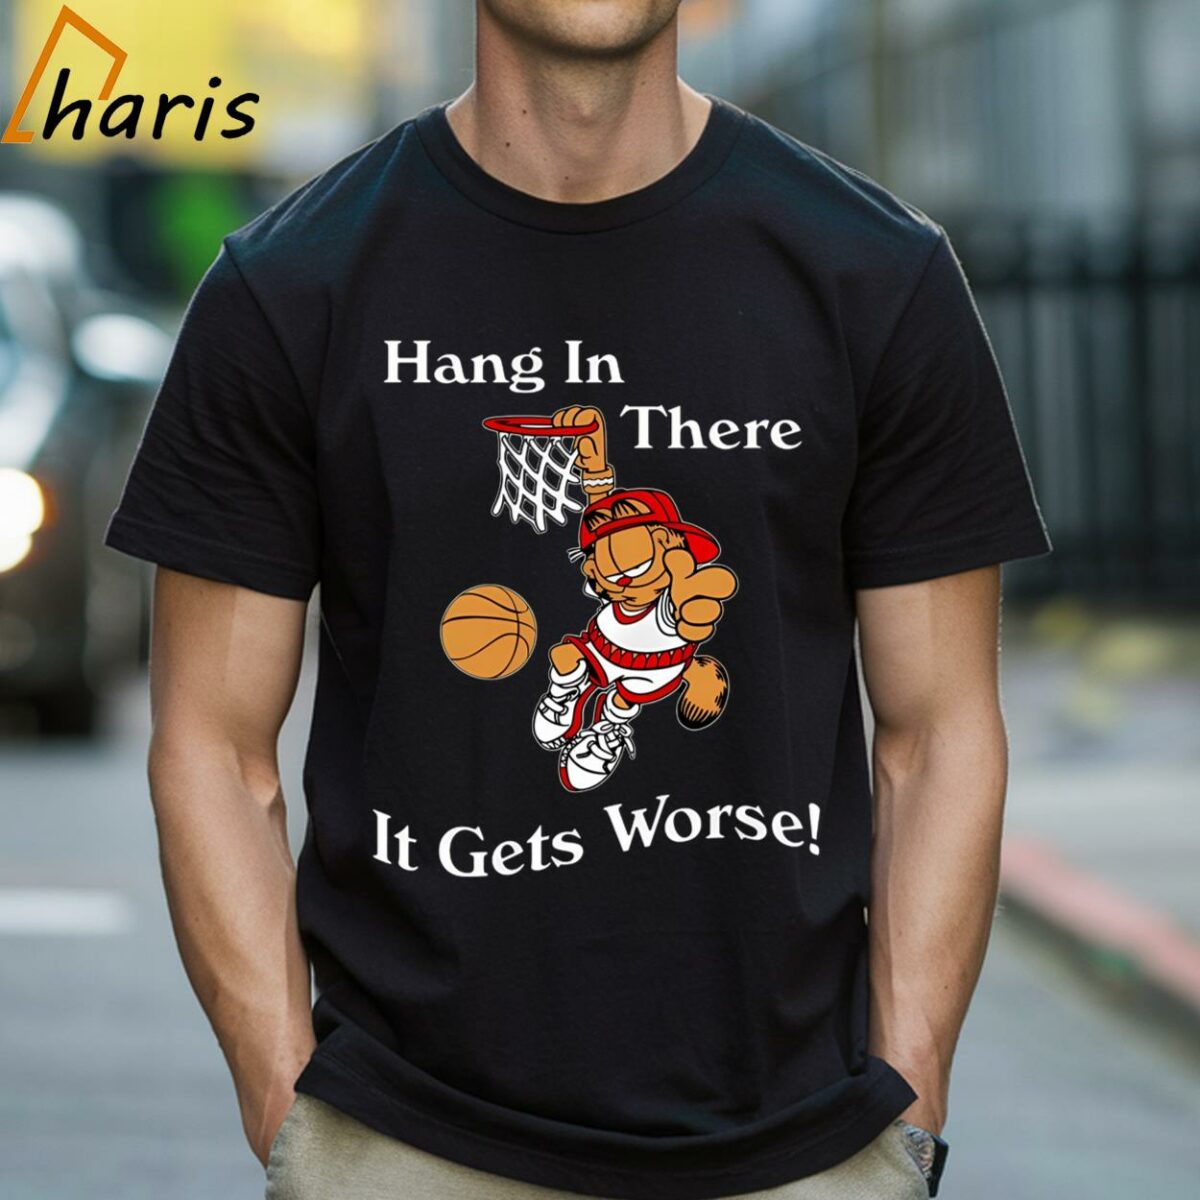 Hang In There It Gets Worse Garfield T shirt 1 Shirt